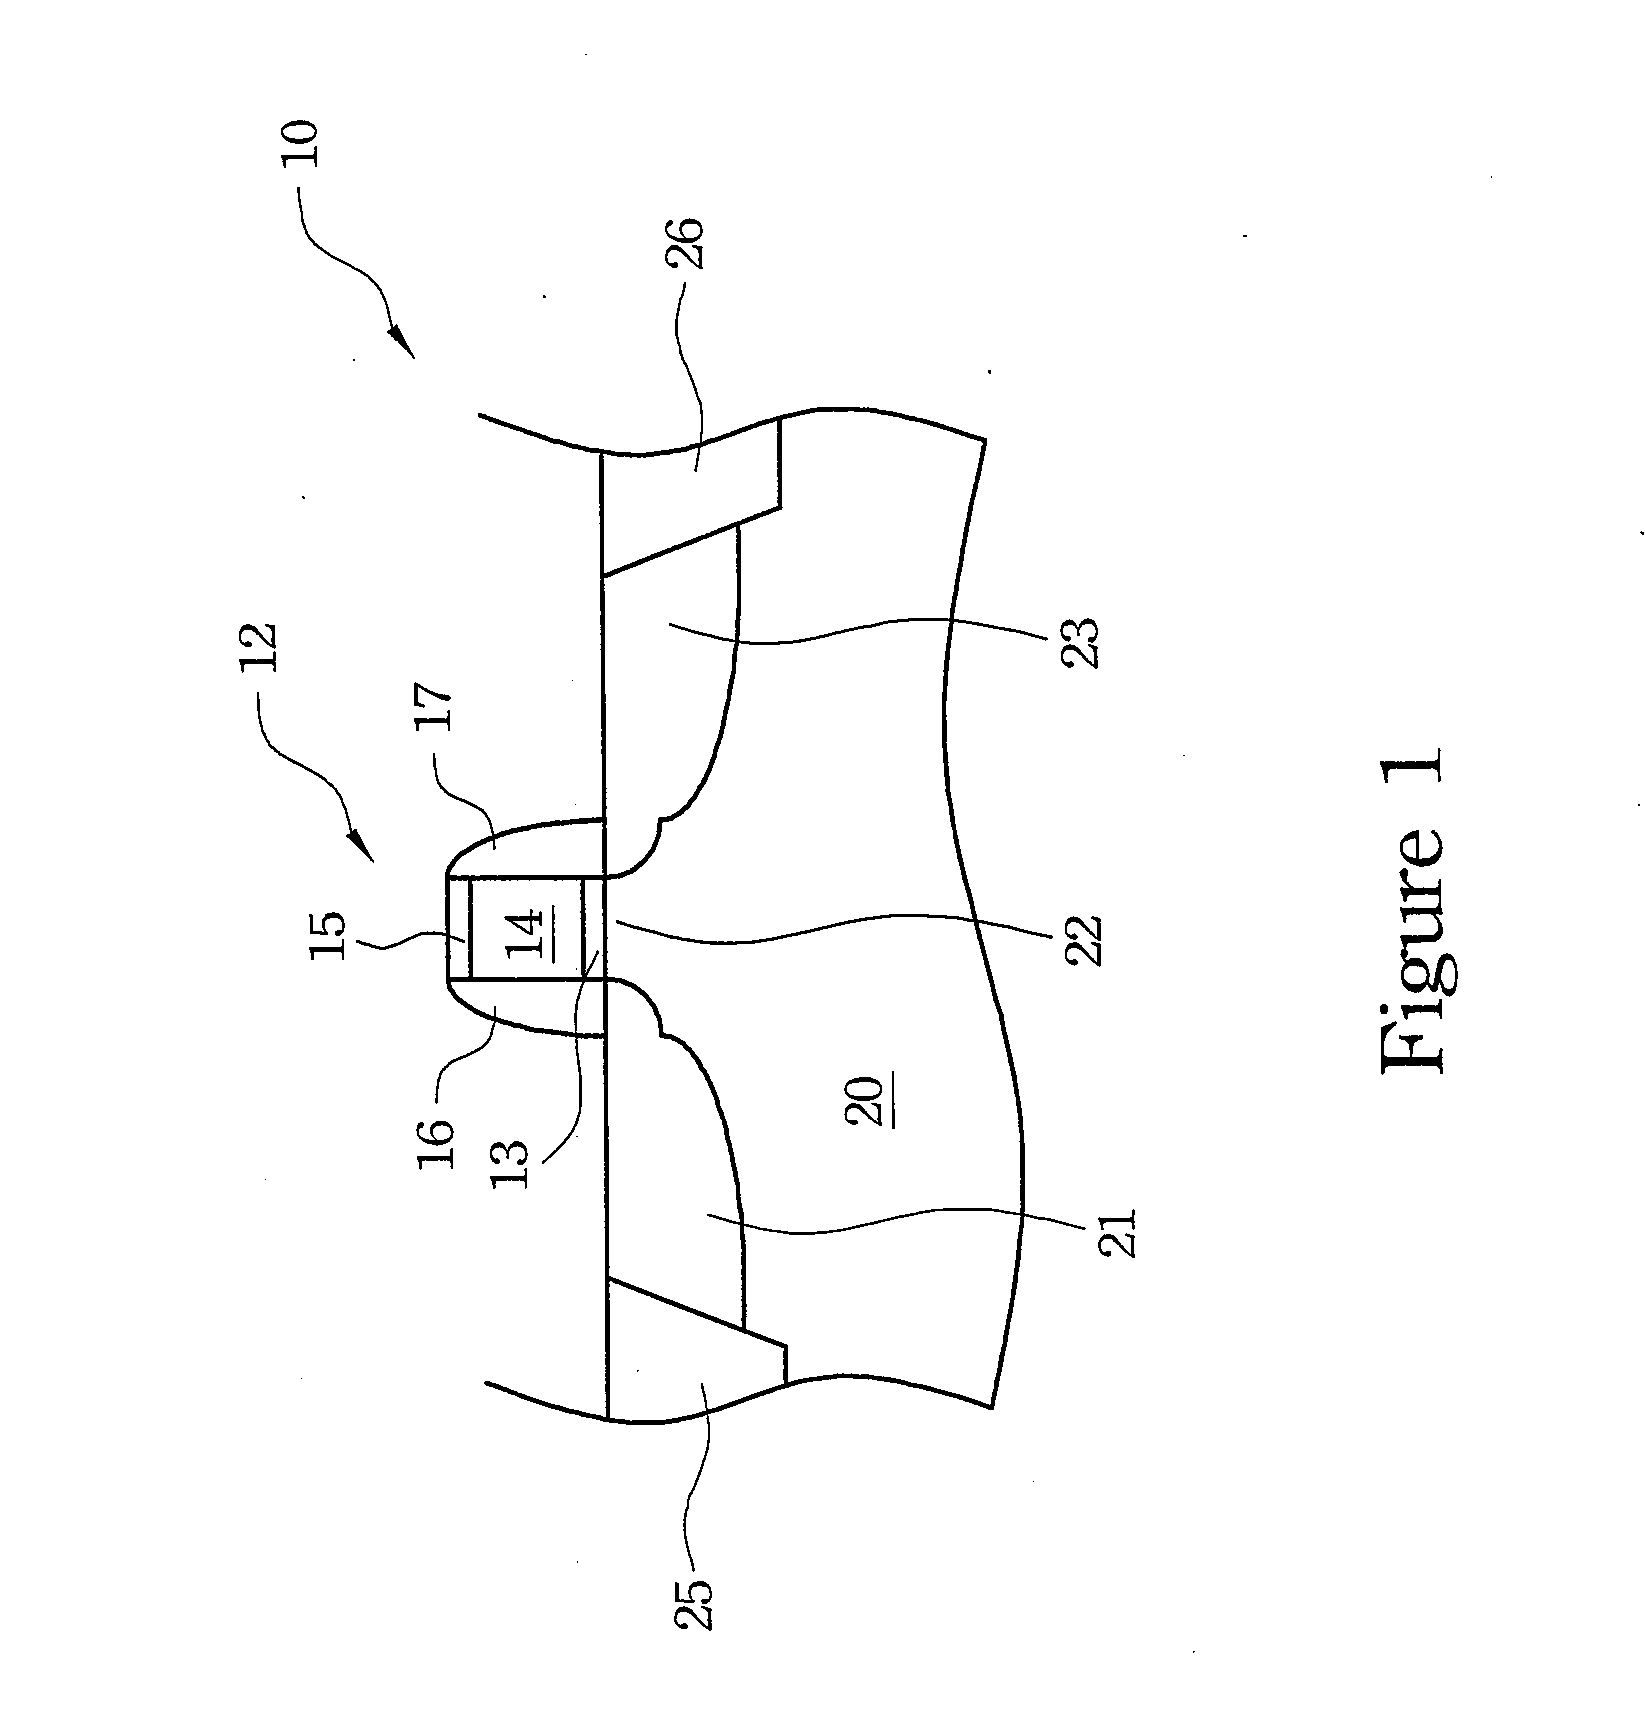 Semiconductor Device with both I/O and Core Components and Method of Fabricating Same